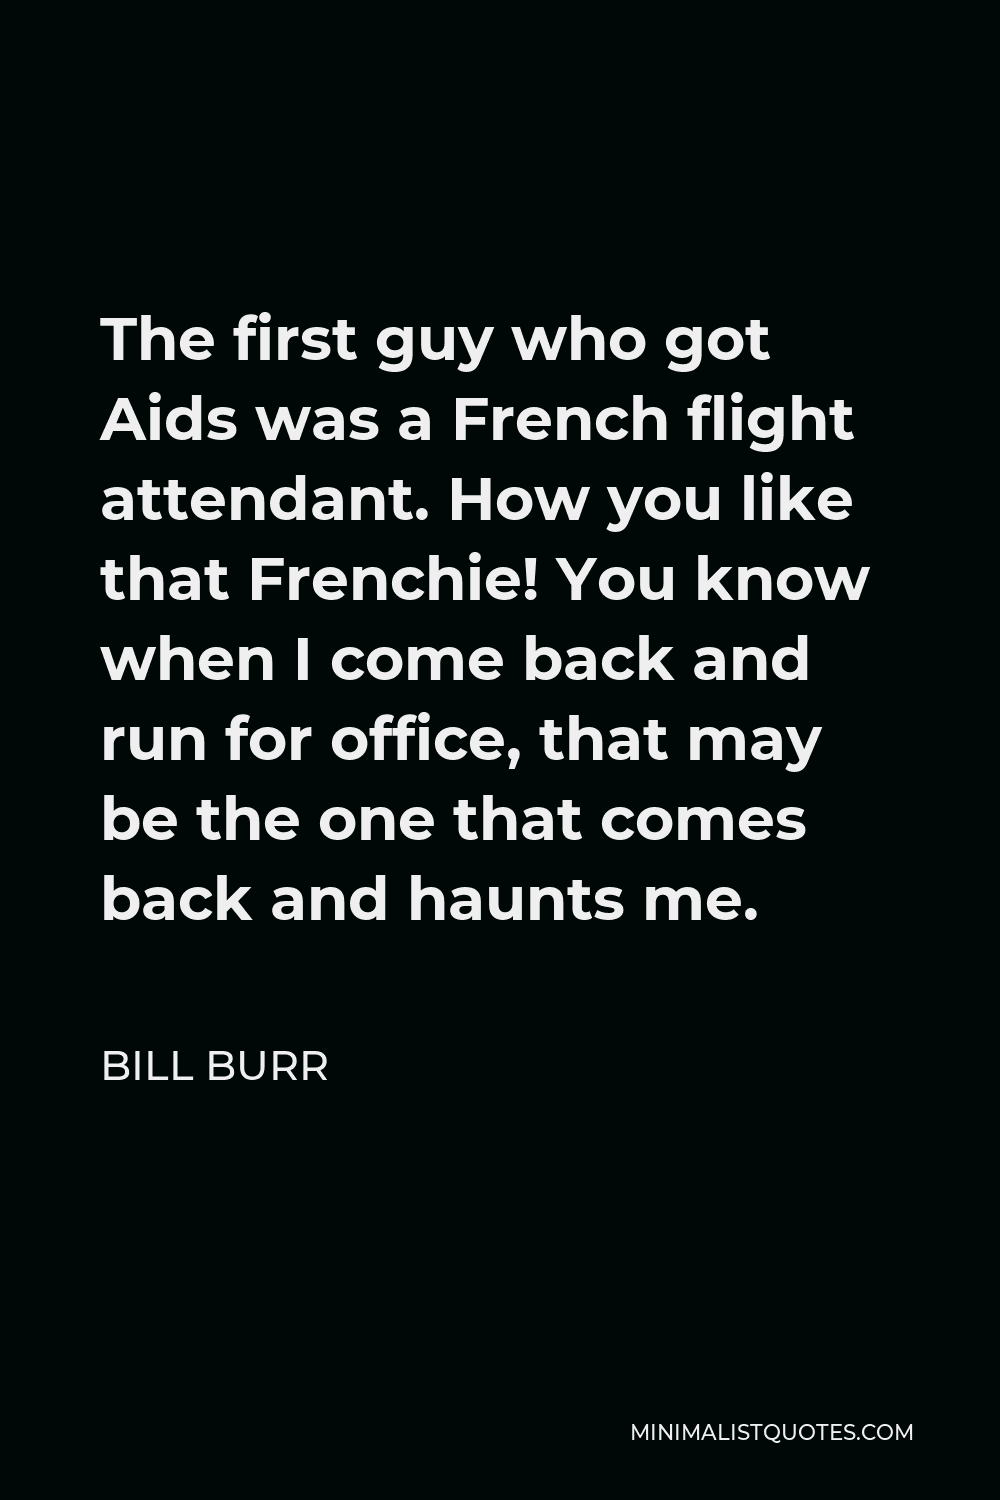 Bill Burr Quote - The first guy who got Aids was a French flight attendant. How you like that Frenchie! You know when I come back and run for office, that may be the one that comes back and haunts me.